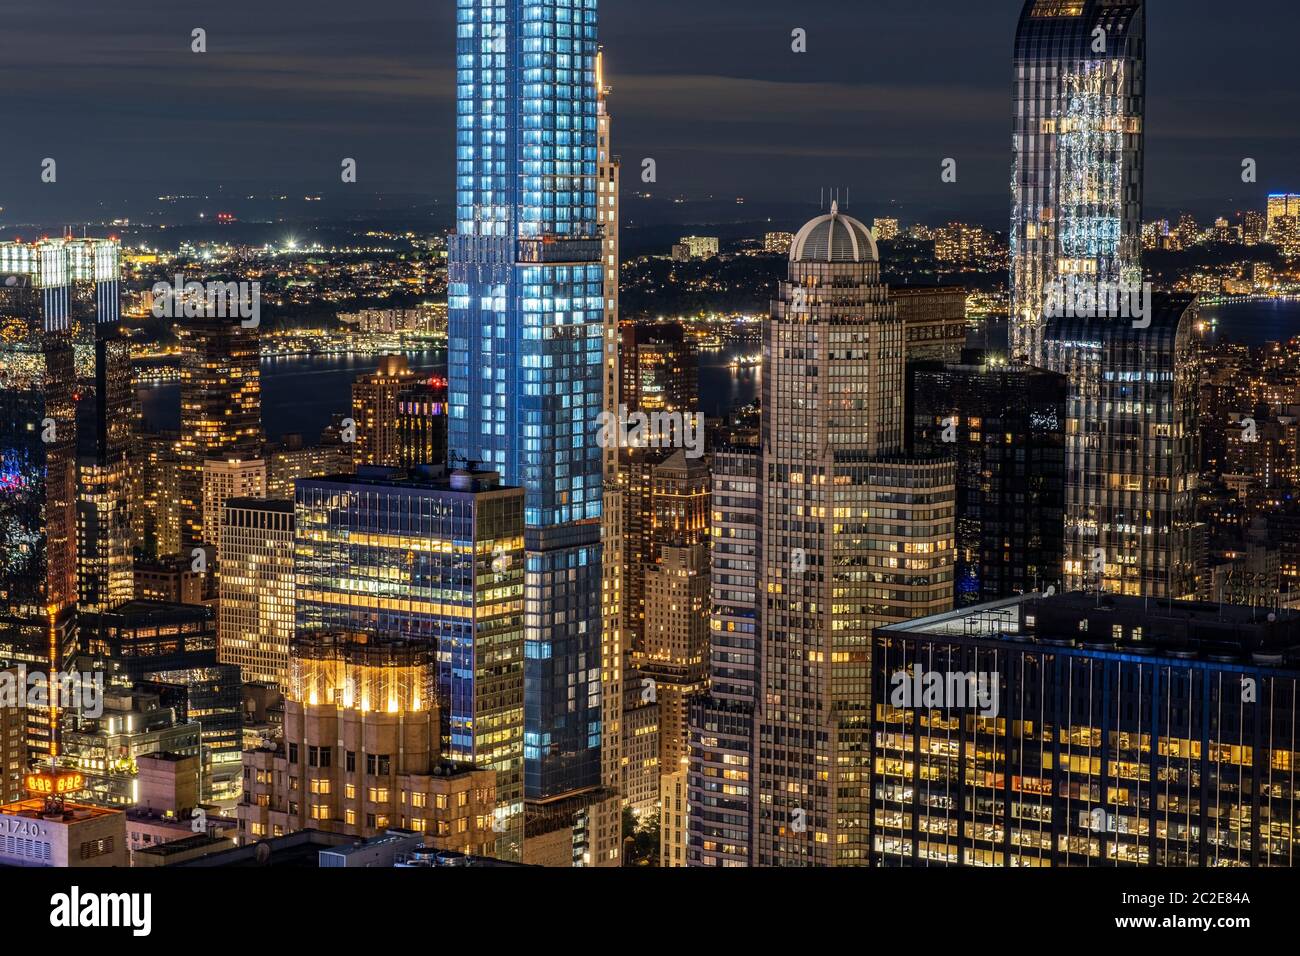 Dusck cityscape of midtown skyscrapers and buildingds view from rooftop Rockefeller Center Stock Photo